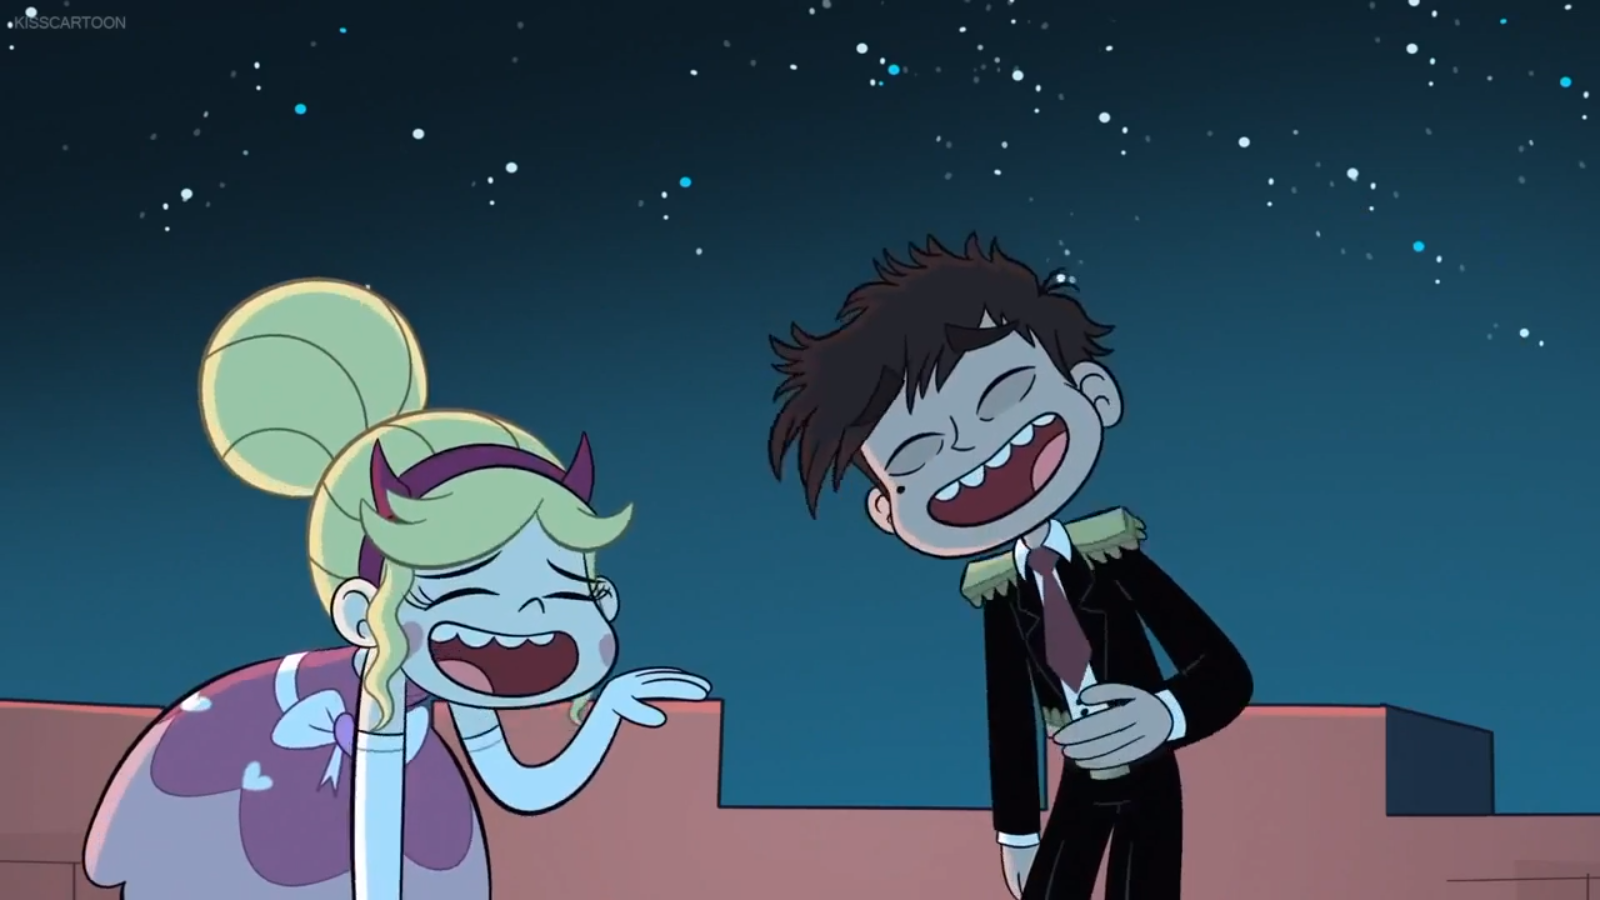 Star Vs The Forces Of Evil Star Blood Moon Ball - HD Wallpaper 